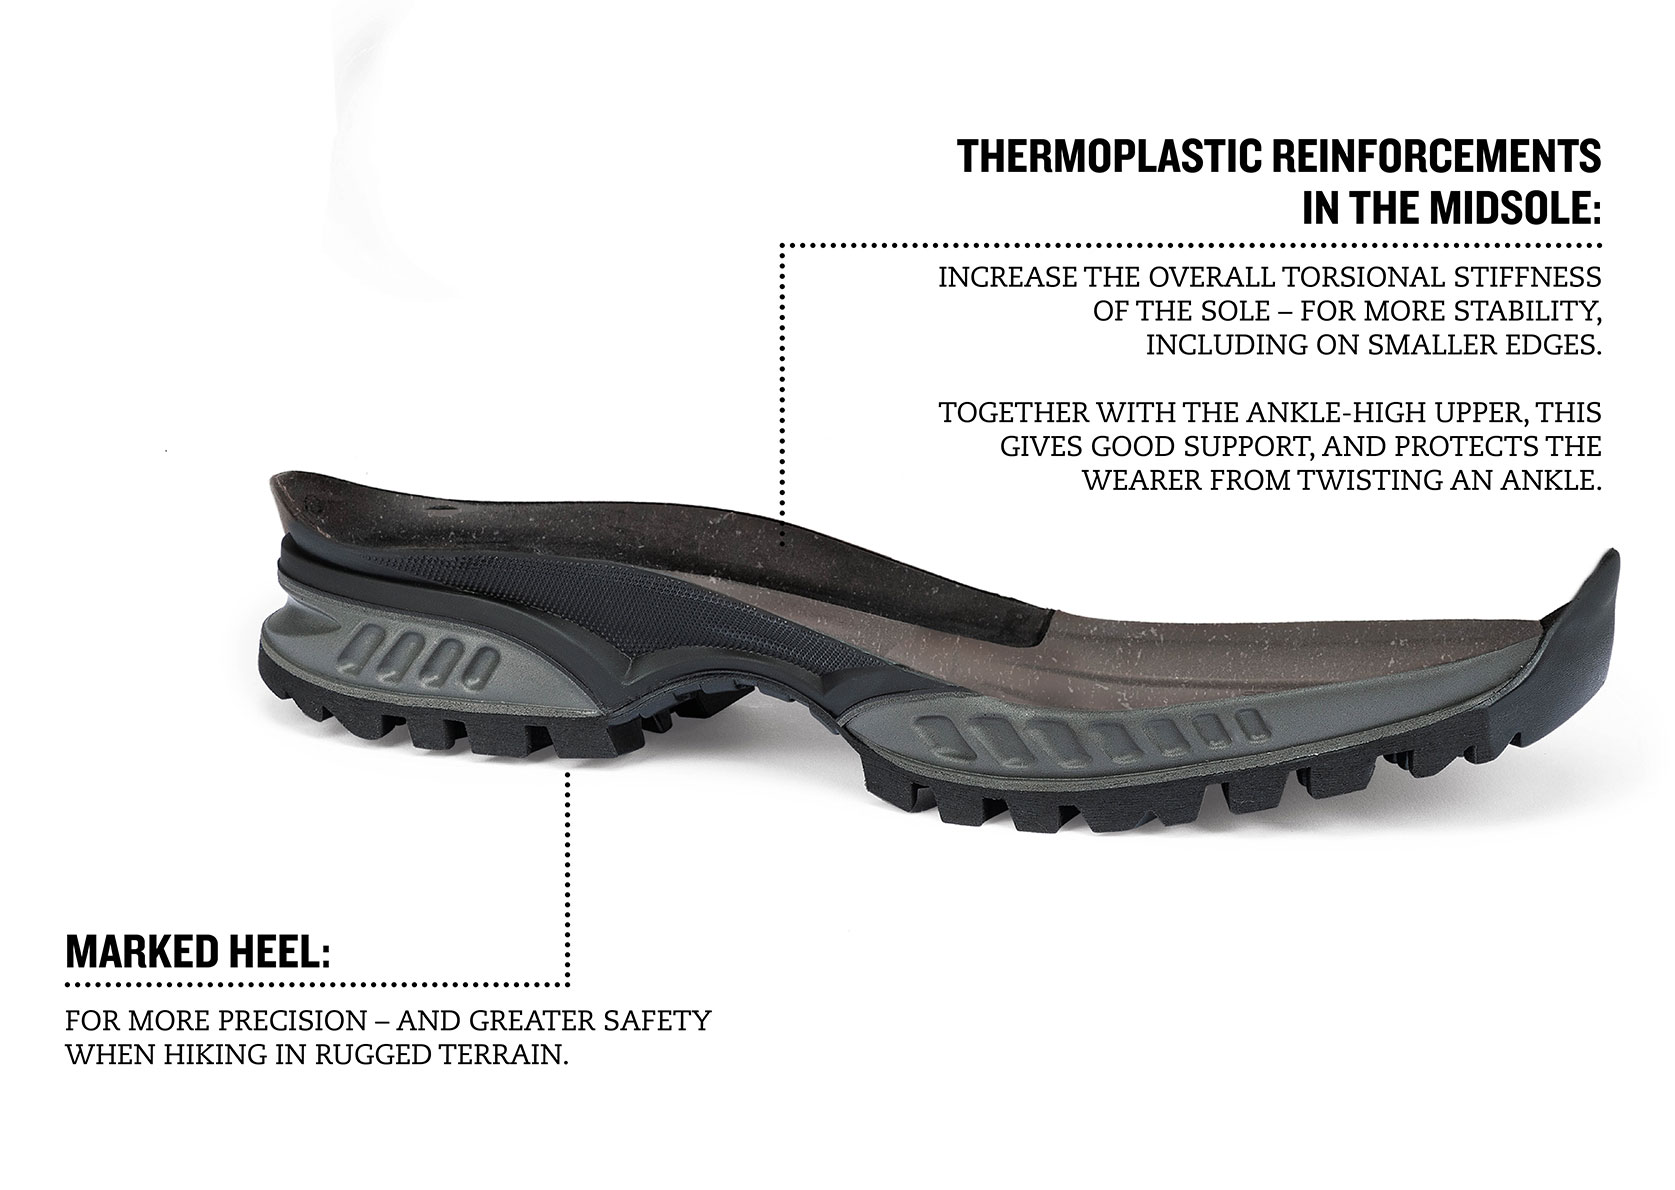 The Hanwag Vibram AW Integral sole